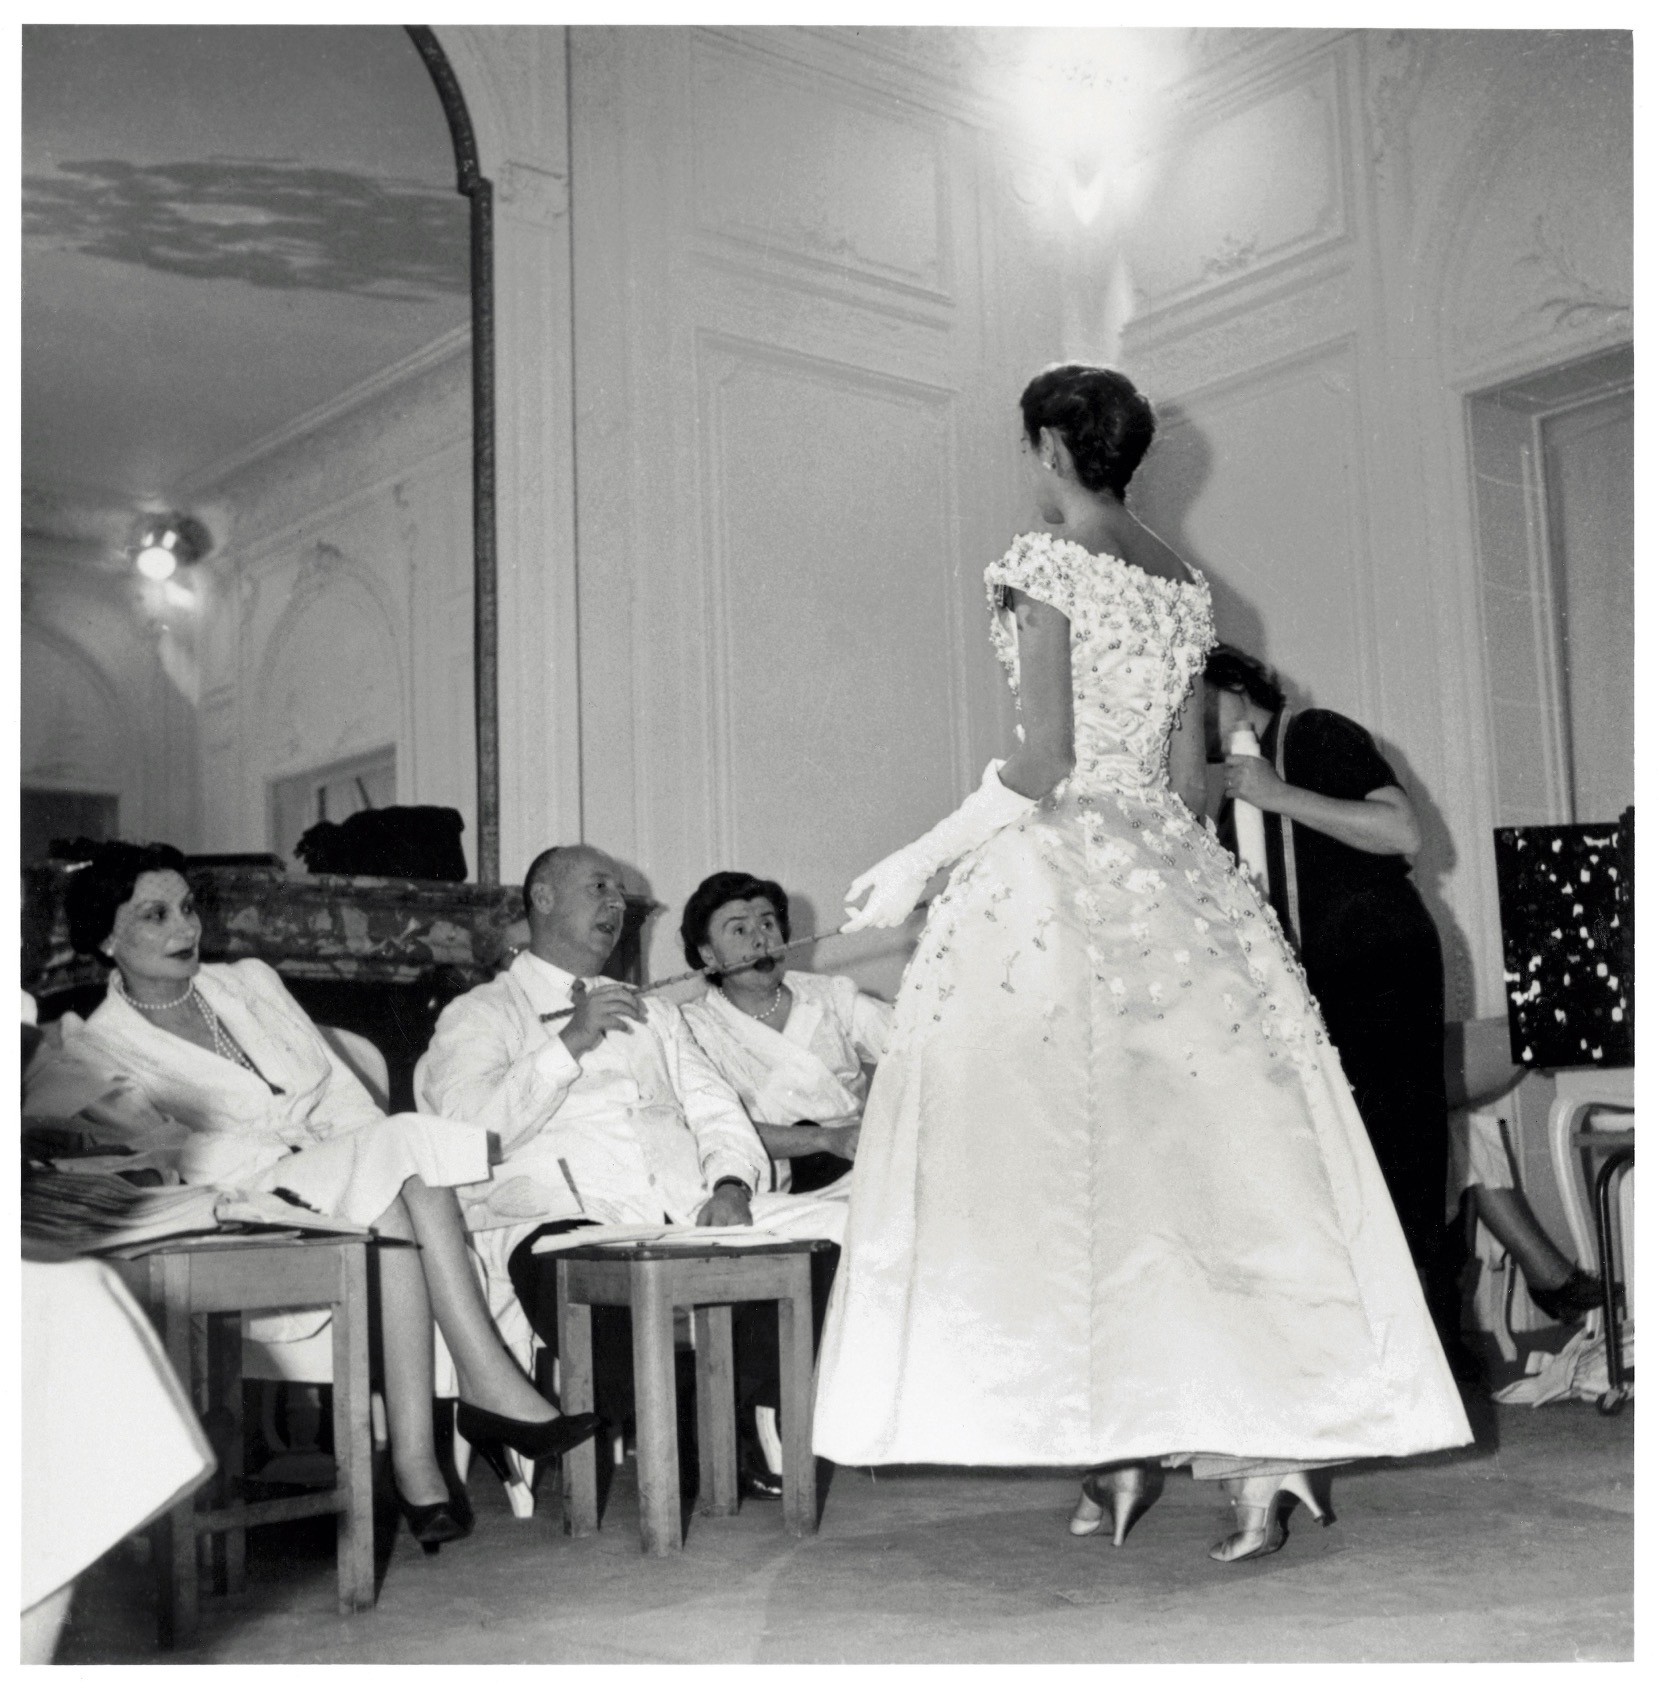 Christian Dior Started Out as an Art Gallerist. Now His Fashion